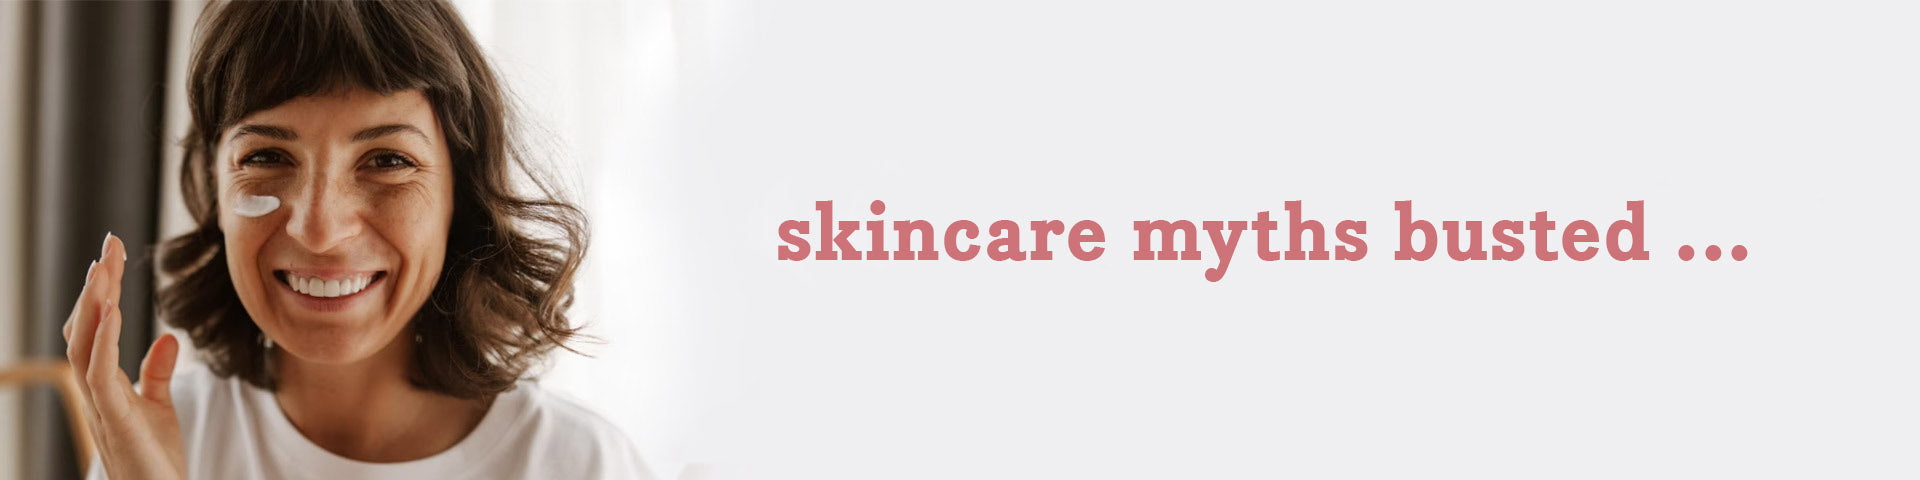 The Top 5 Skincare Myths Debunked